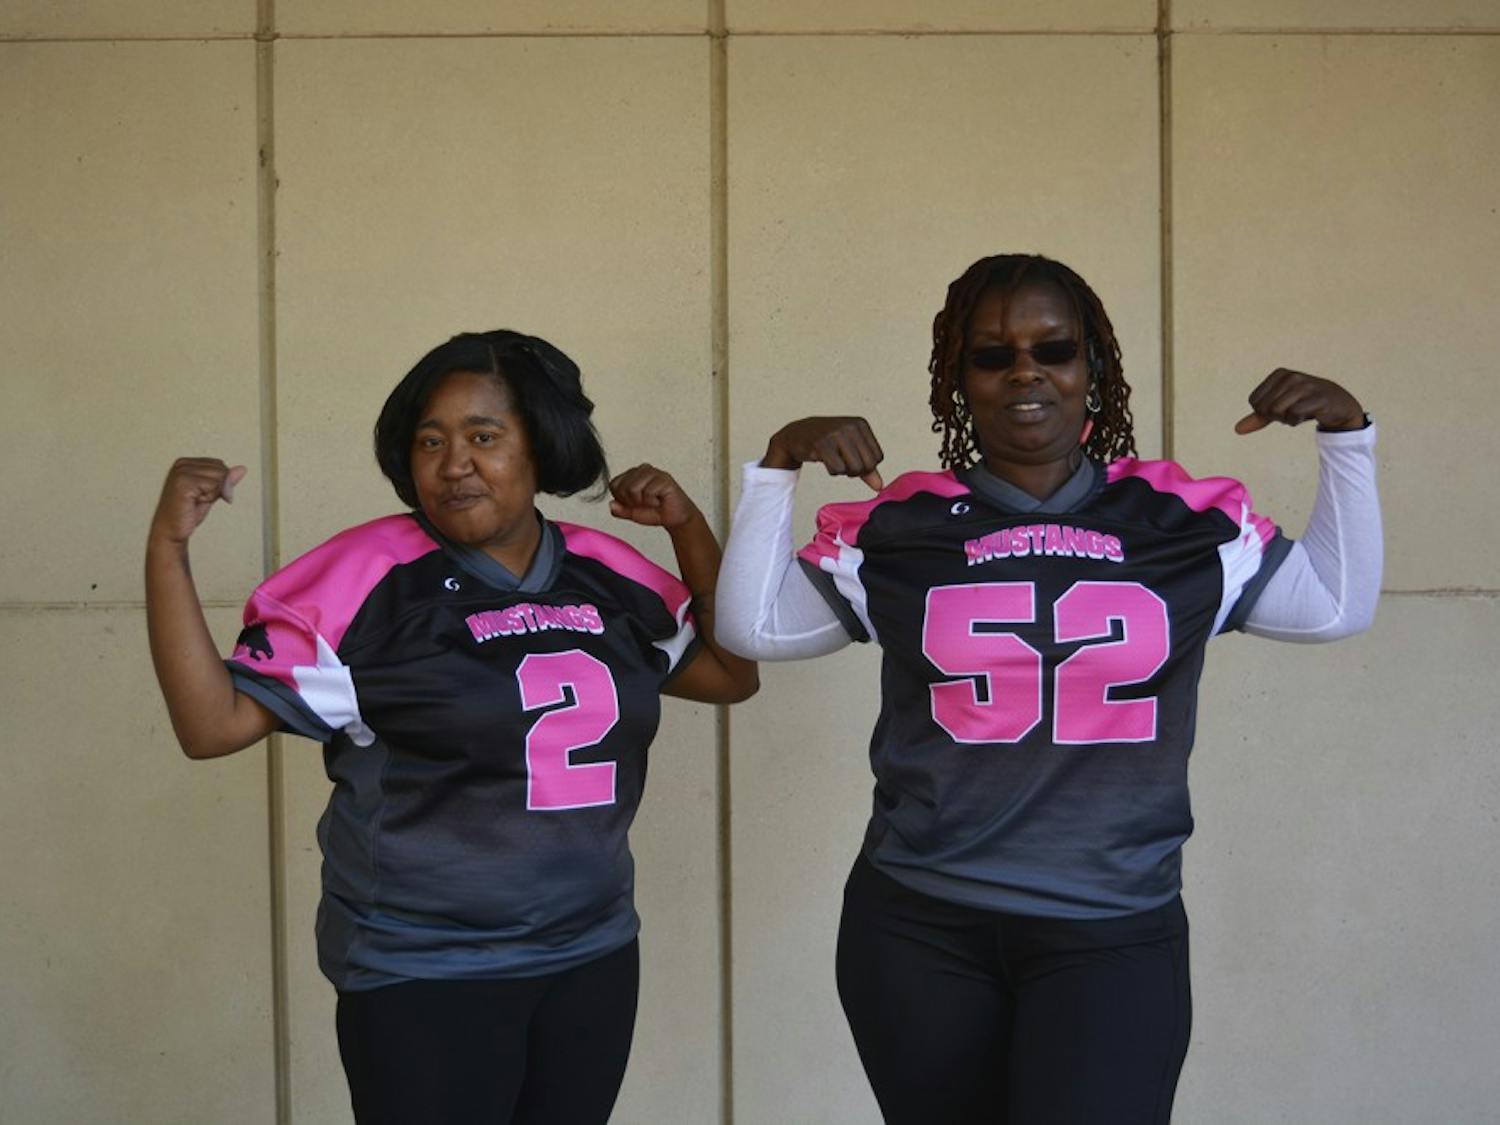 McDougle Middle School's football team, with help from Team Moms BLANK (left) and BLANK, raised money for pink uniforms and a donation to the Susan G. Komen Foundation, in support of Breast Cancer Awareness.